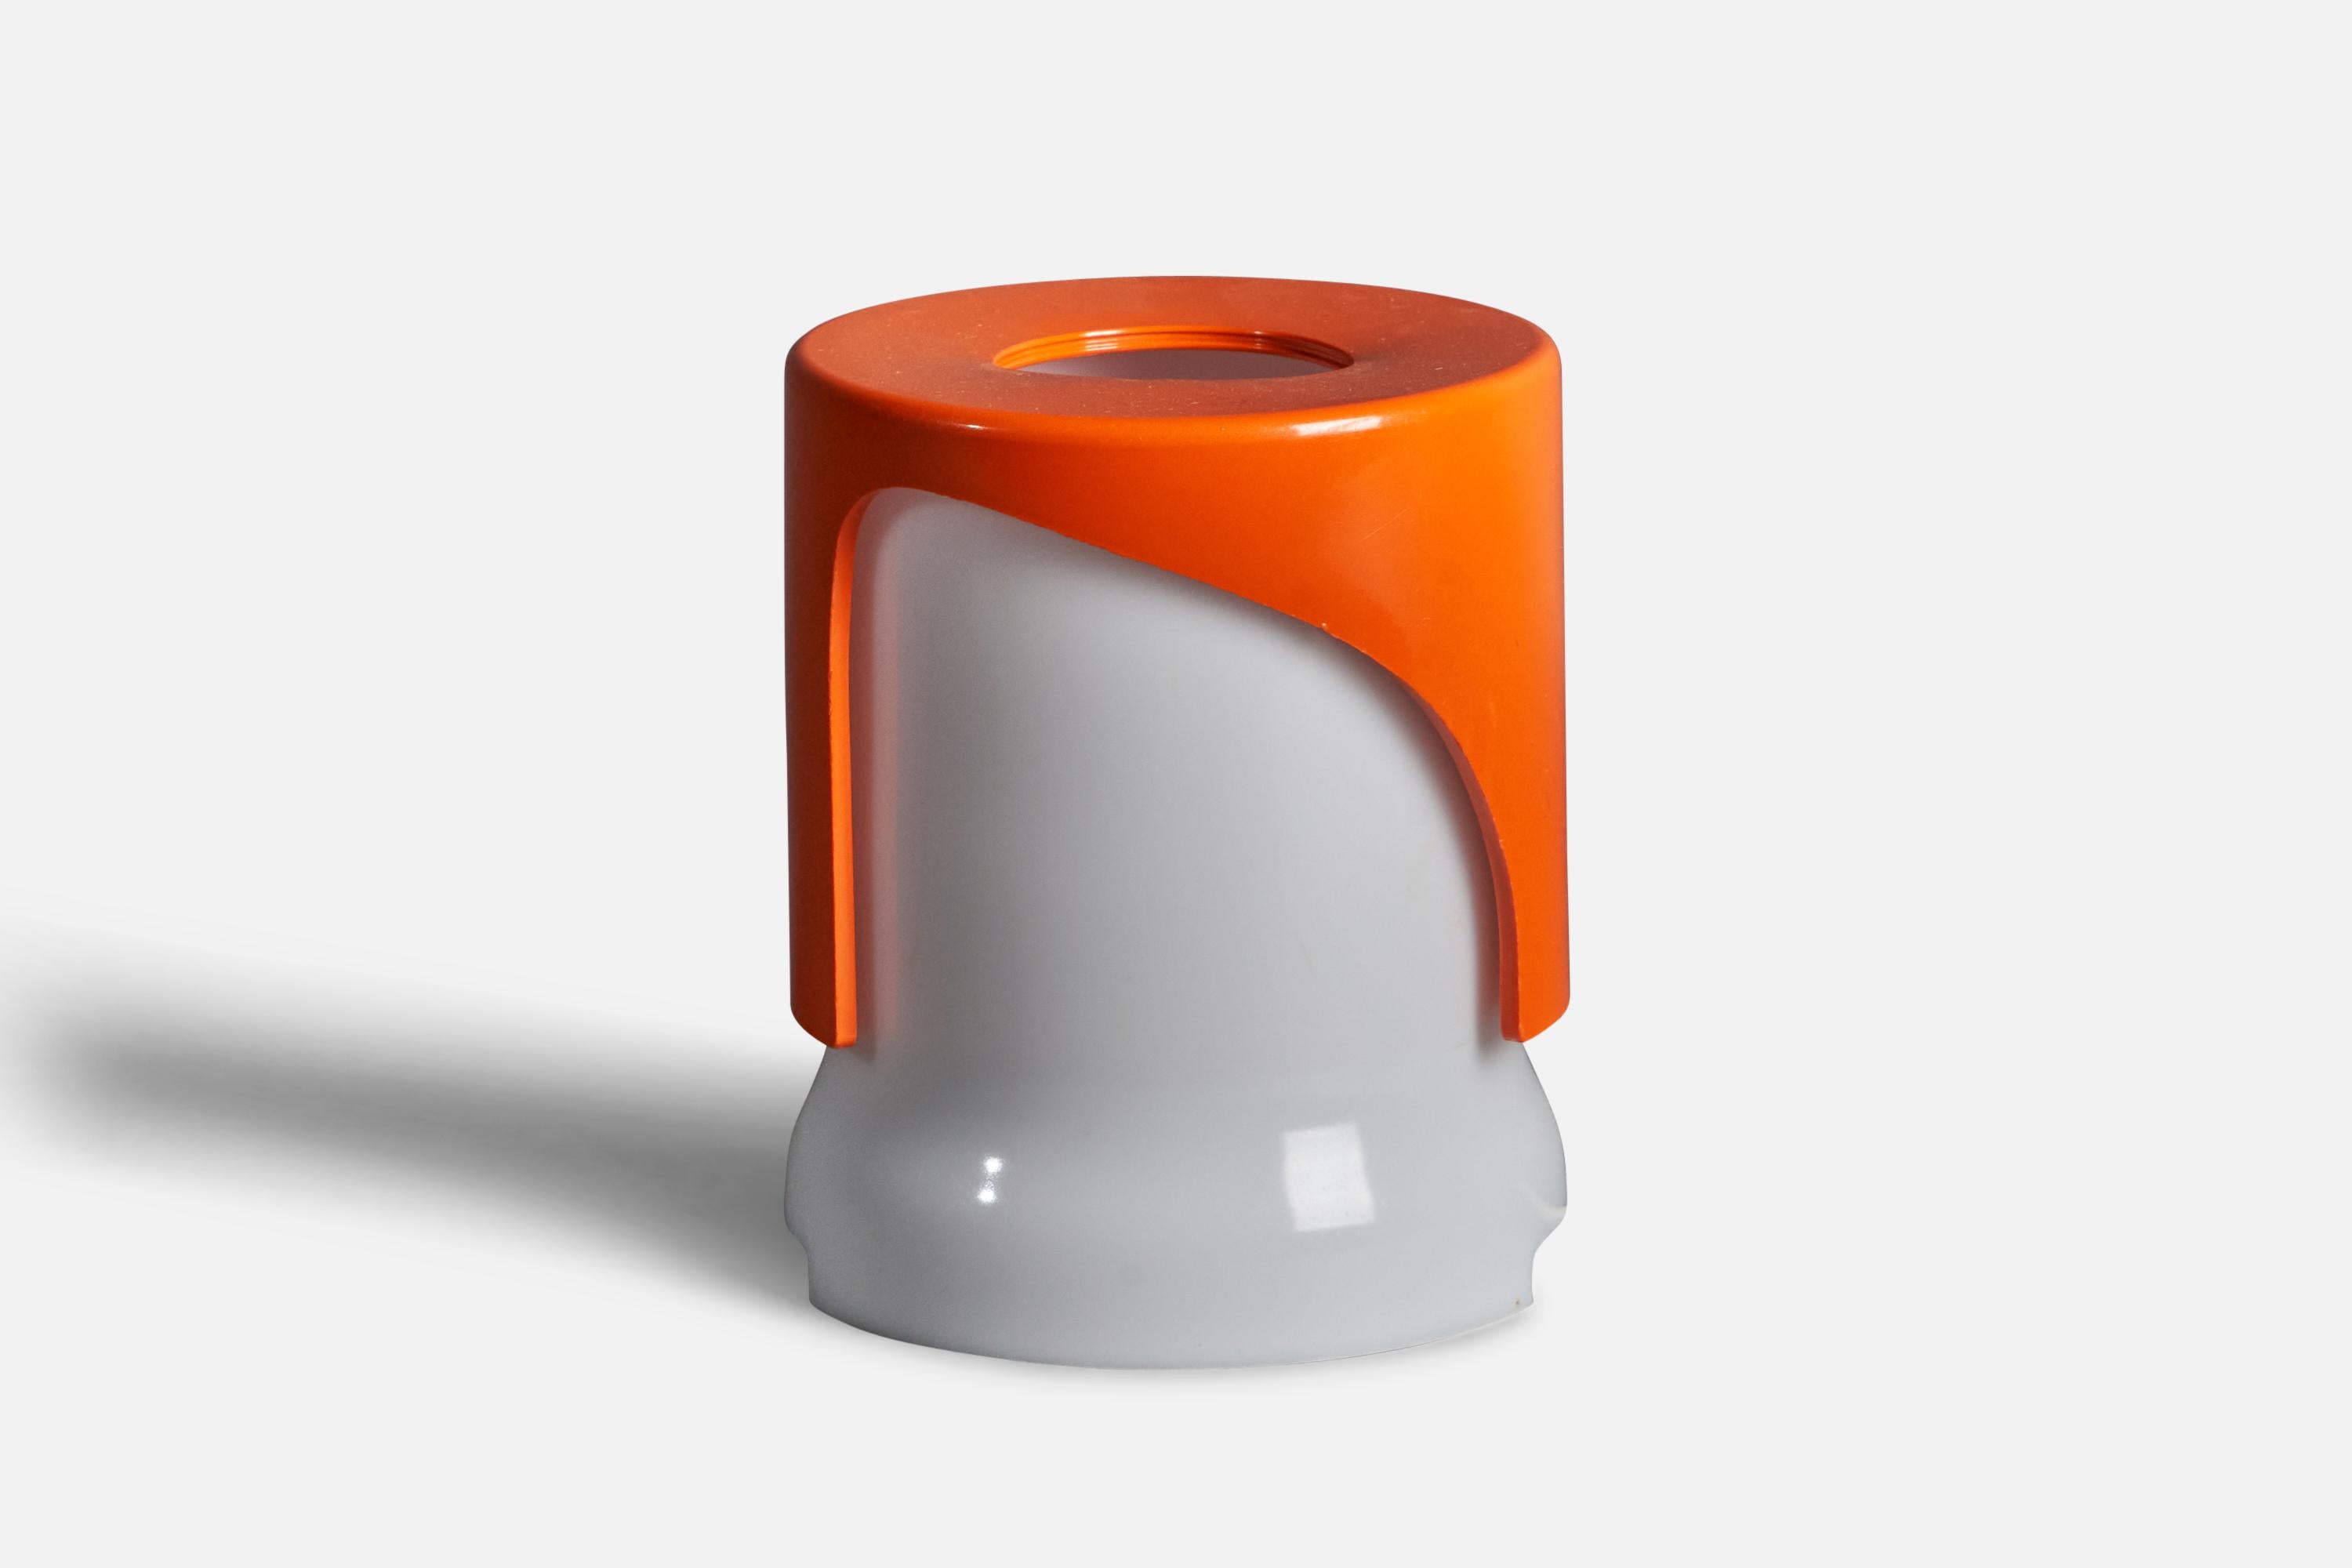 A white and orange acrylic table lamp designed by Joe Colombo and produced by Kartell, Italy, c. 1960s.

Overall Dimensions (inches): 5.6” H x 4.6” Diameter 
Bulb Specifications: E-14 Bulb
Number of Sockets: 1